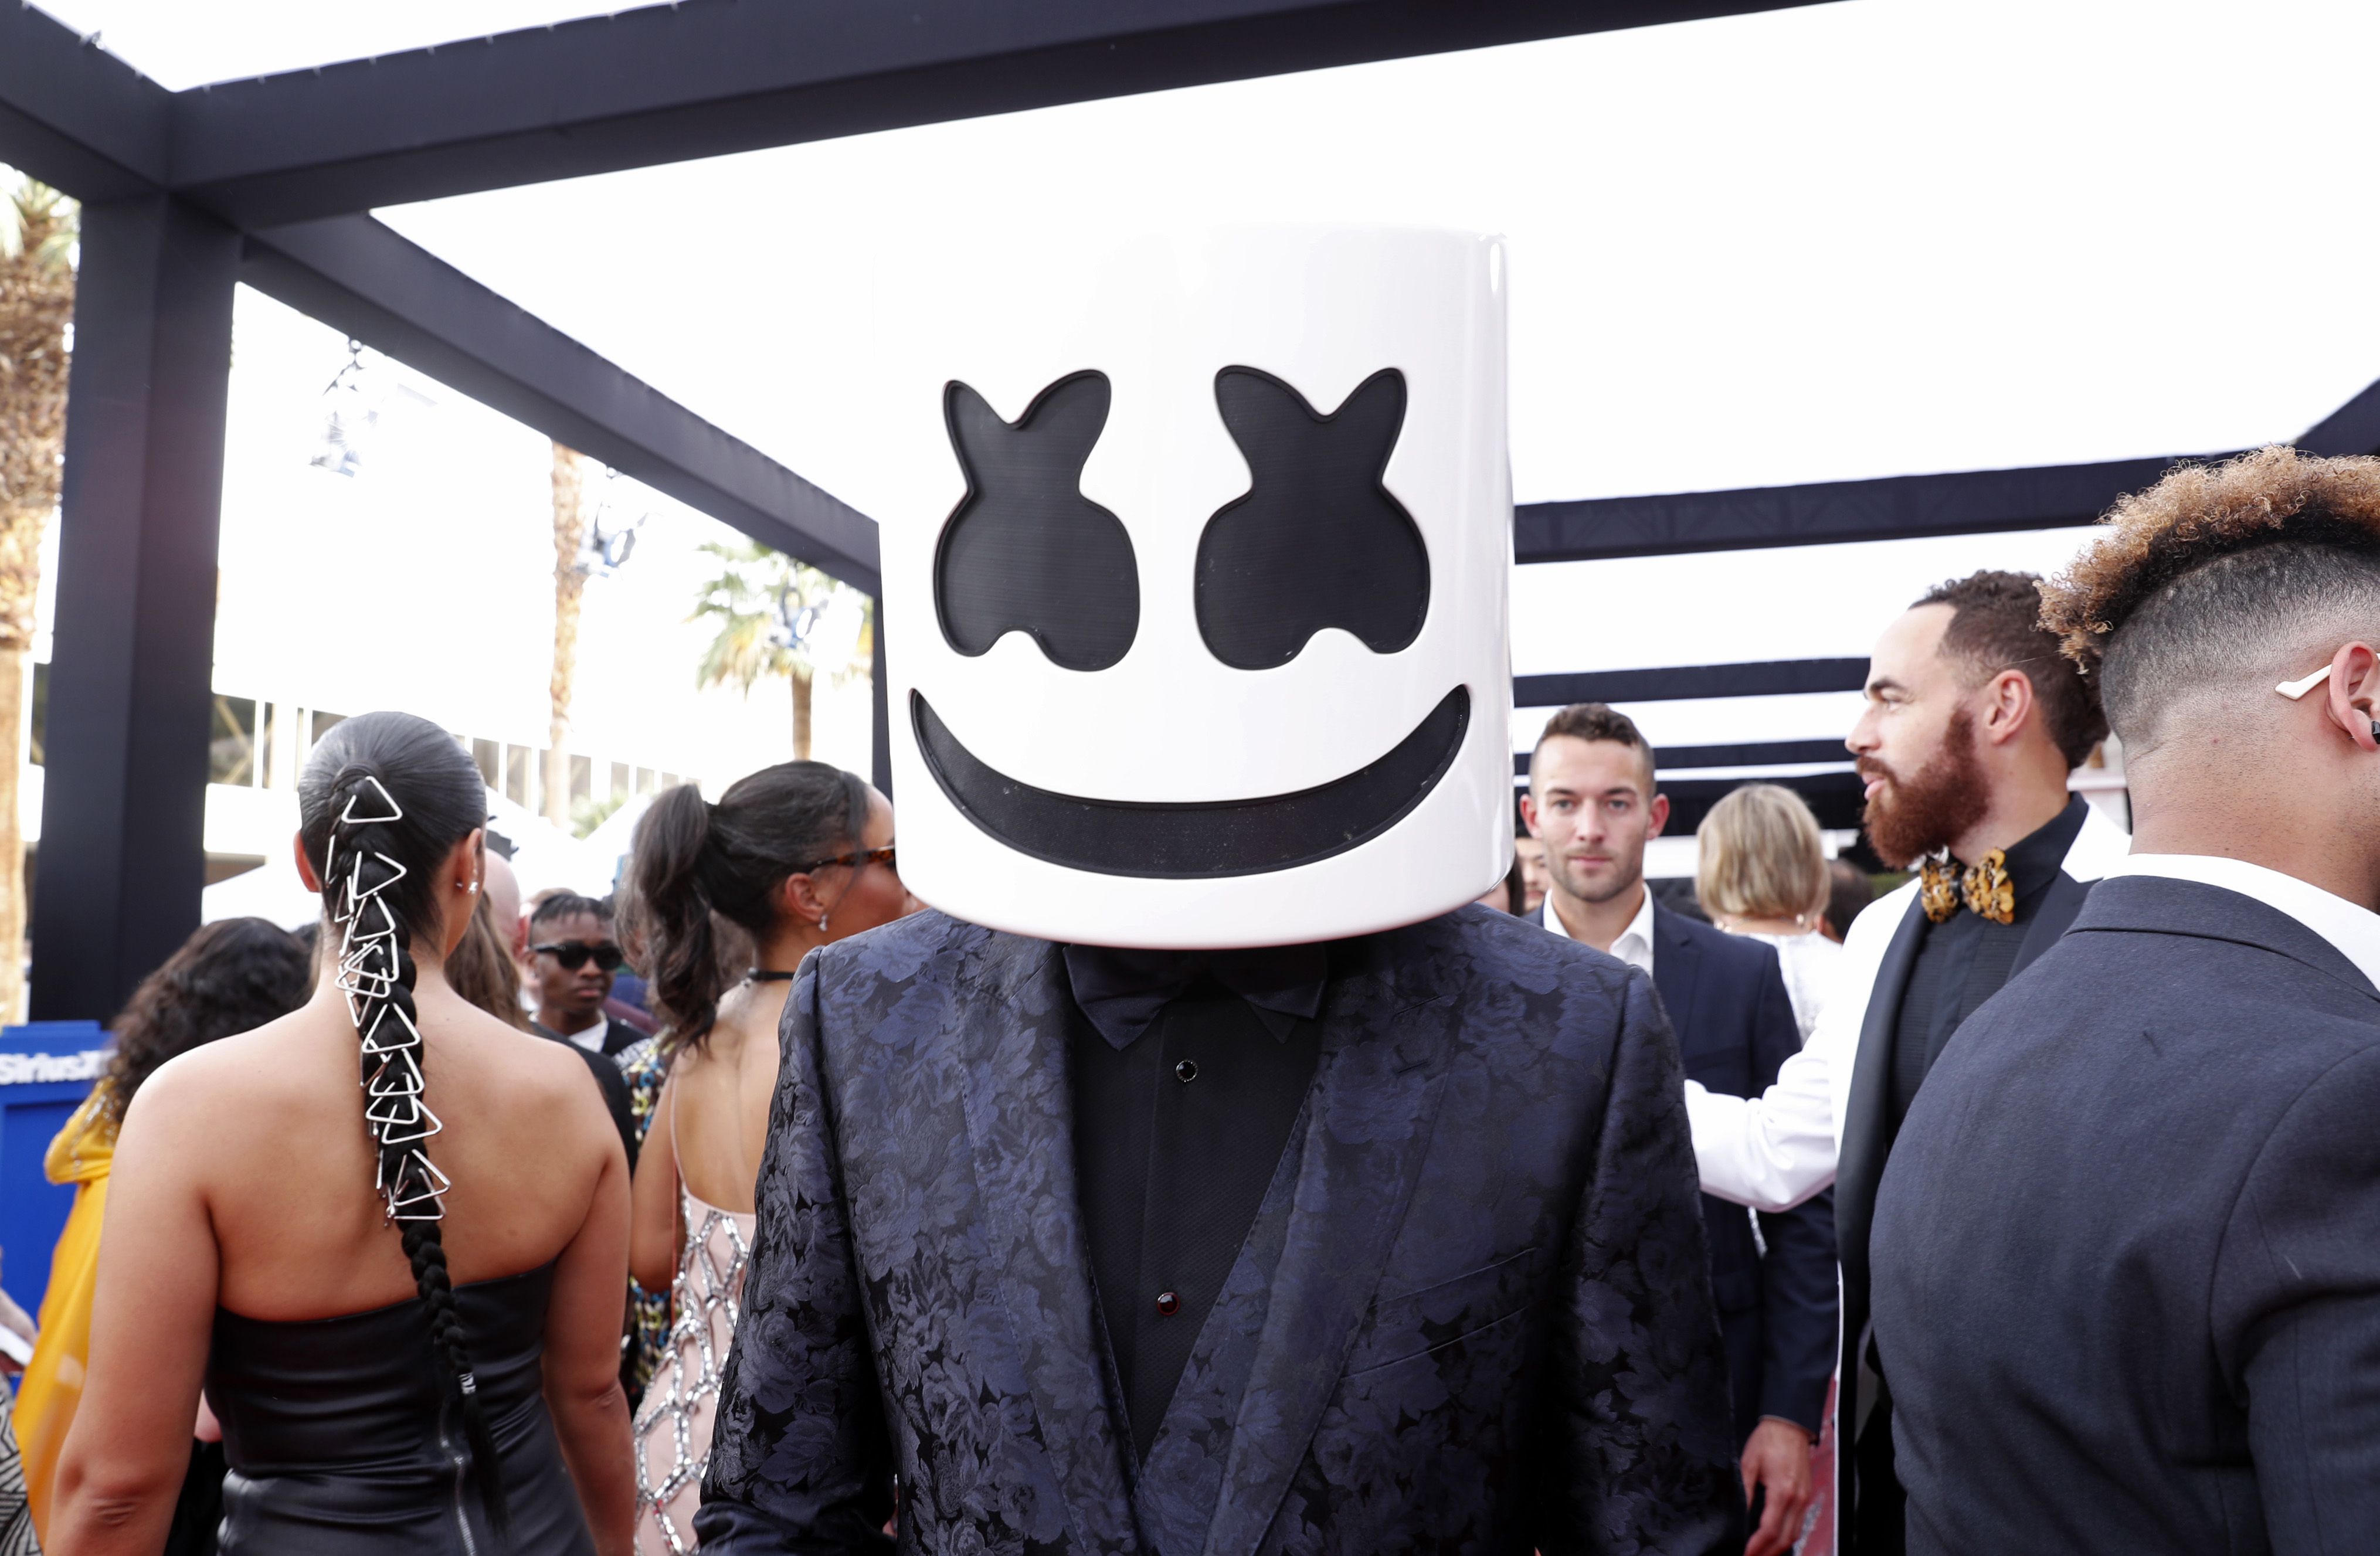 Bygger Tether mekanisk What Does Marshmello's Face Look Like Under His Mask?